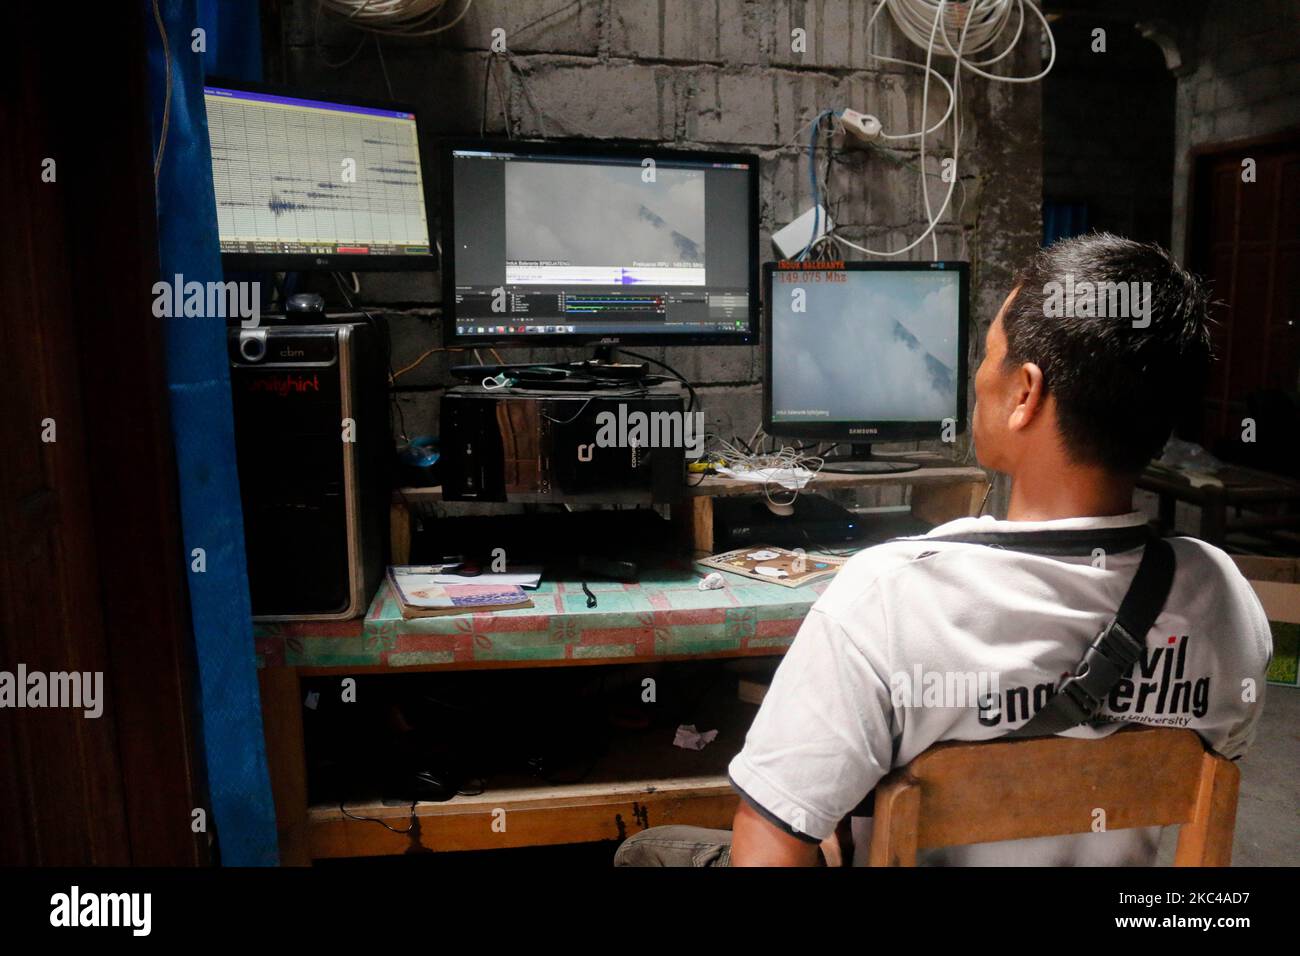 A natural disaster volunteers monitors the activity of merapi volcano through Closed Circuit Television (CCTV) at Mount Merapi monitoring station on November 21, 2020 in Balerante, Kemalang, Klaten, Central Java, Indonesia. Authorities in Indonesia issued raised the status of a level three alert and evacuated a densely populated village close to the summit of Mount Merapi, as the active volcano showed renewed signs of approaching an eruption. (Photo by Muhammad Ihsan/NurPhoto) Stock Photo